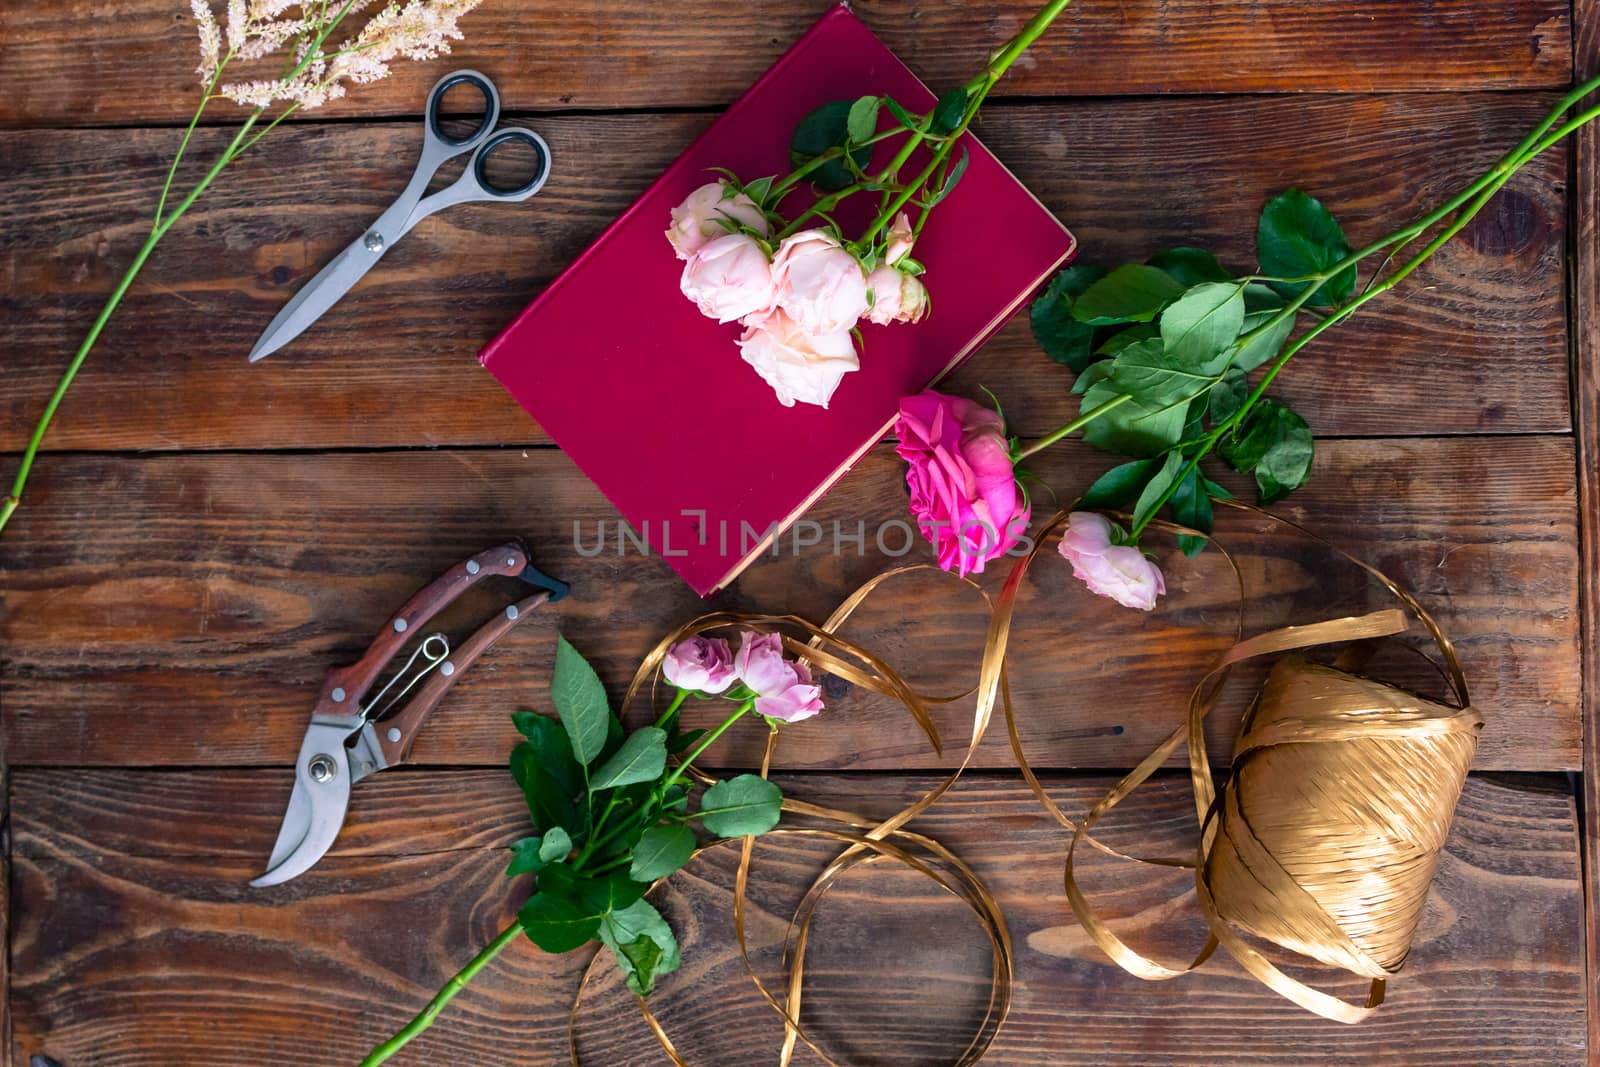 The workplace of the florist to work. Side view. Making floral decorations. Flowers on a old wooden table. Tools and accessories florists need for making up a bouquet. by rdv27